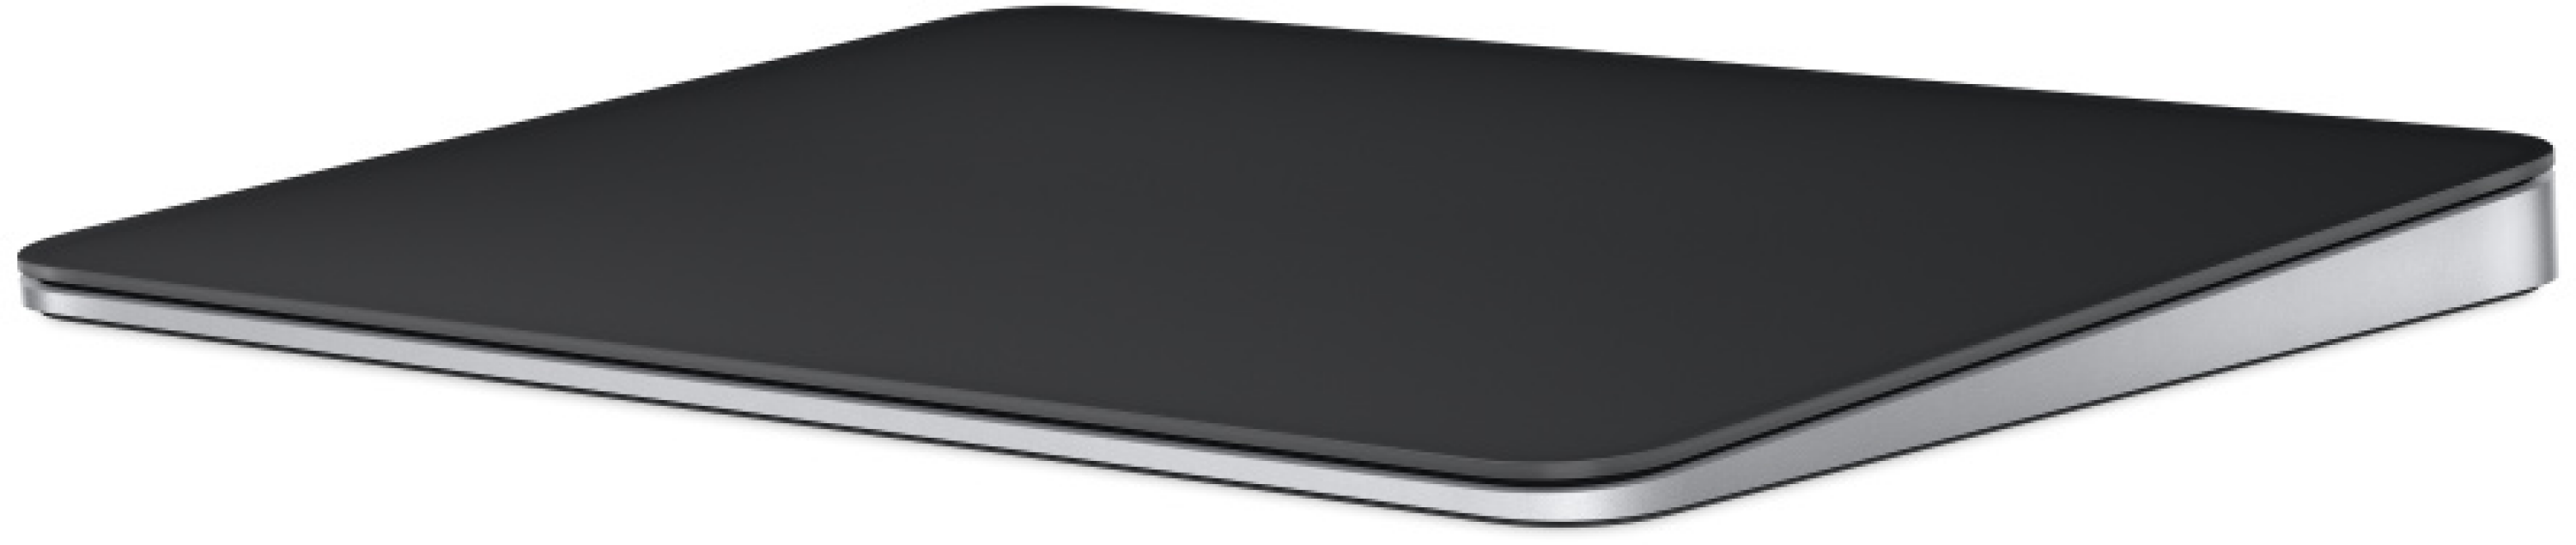 Apple Magic Trackpad with USB-C - Black | Sweetwater